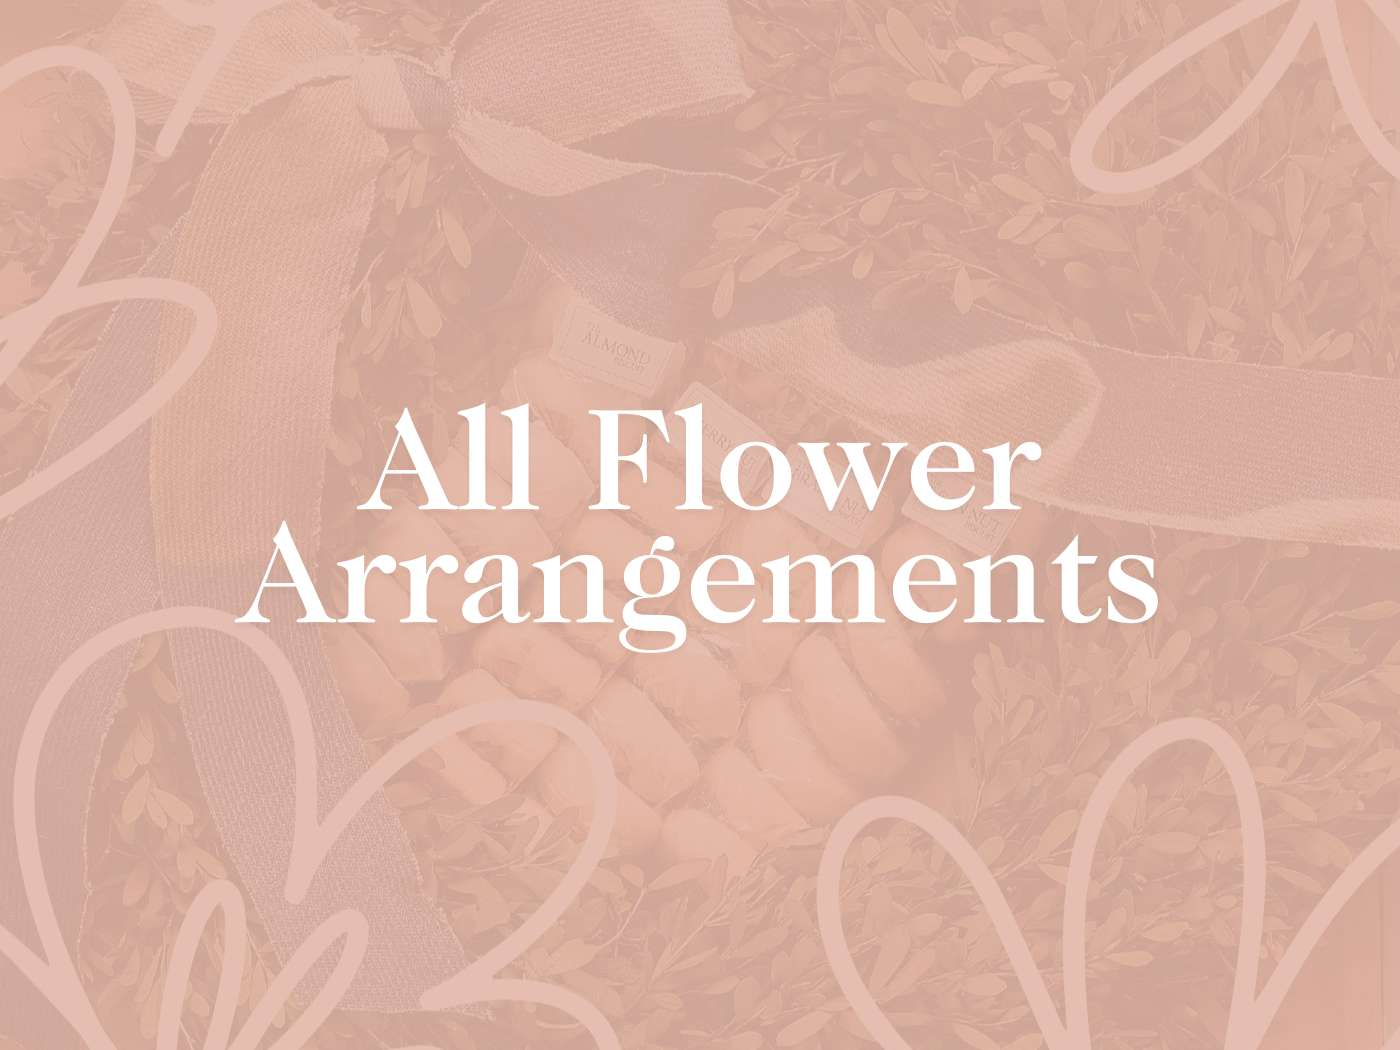 A stylishly muted image showcasing 'All Flower Arrangements' with delicate heart patterns and an artistic, subdued colour palette, from Fabulous Flowers and Gifts